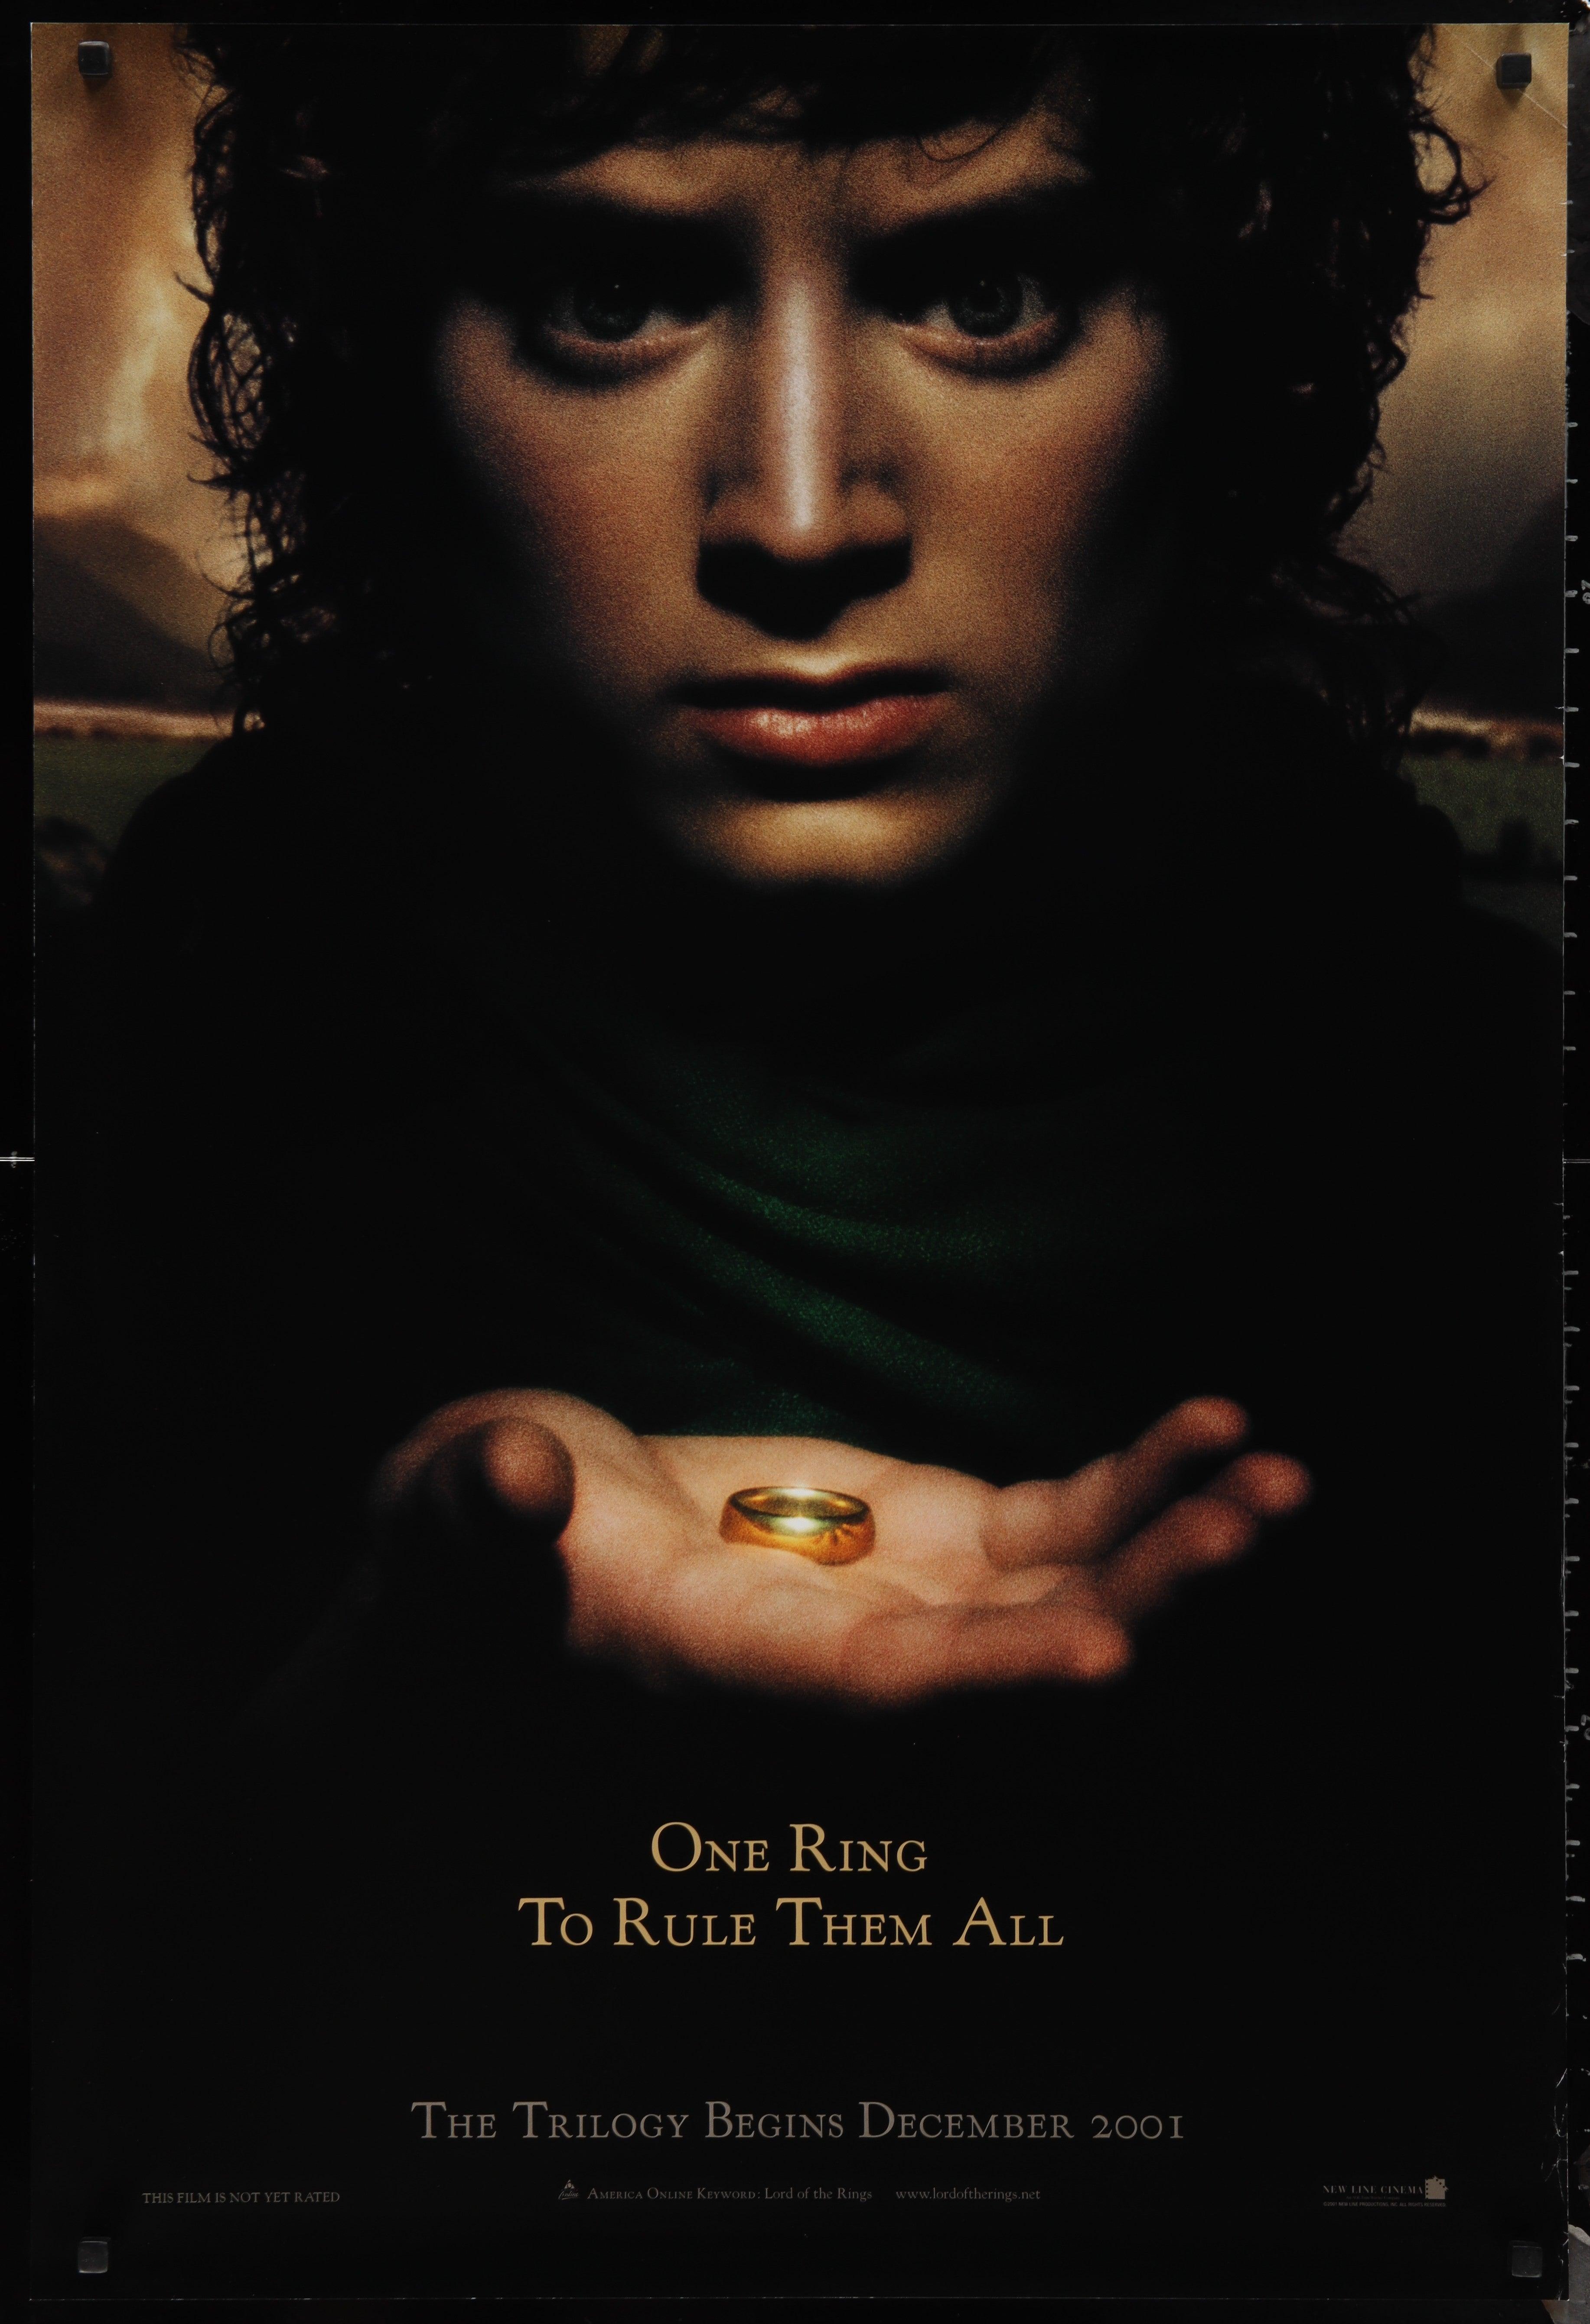 The Lord of the Rings: The Fellowship of the Ring, Film